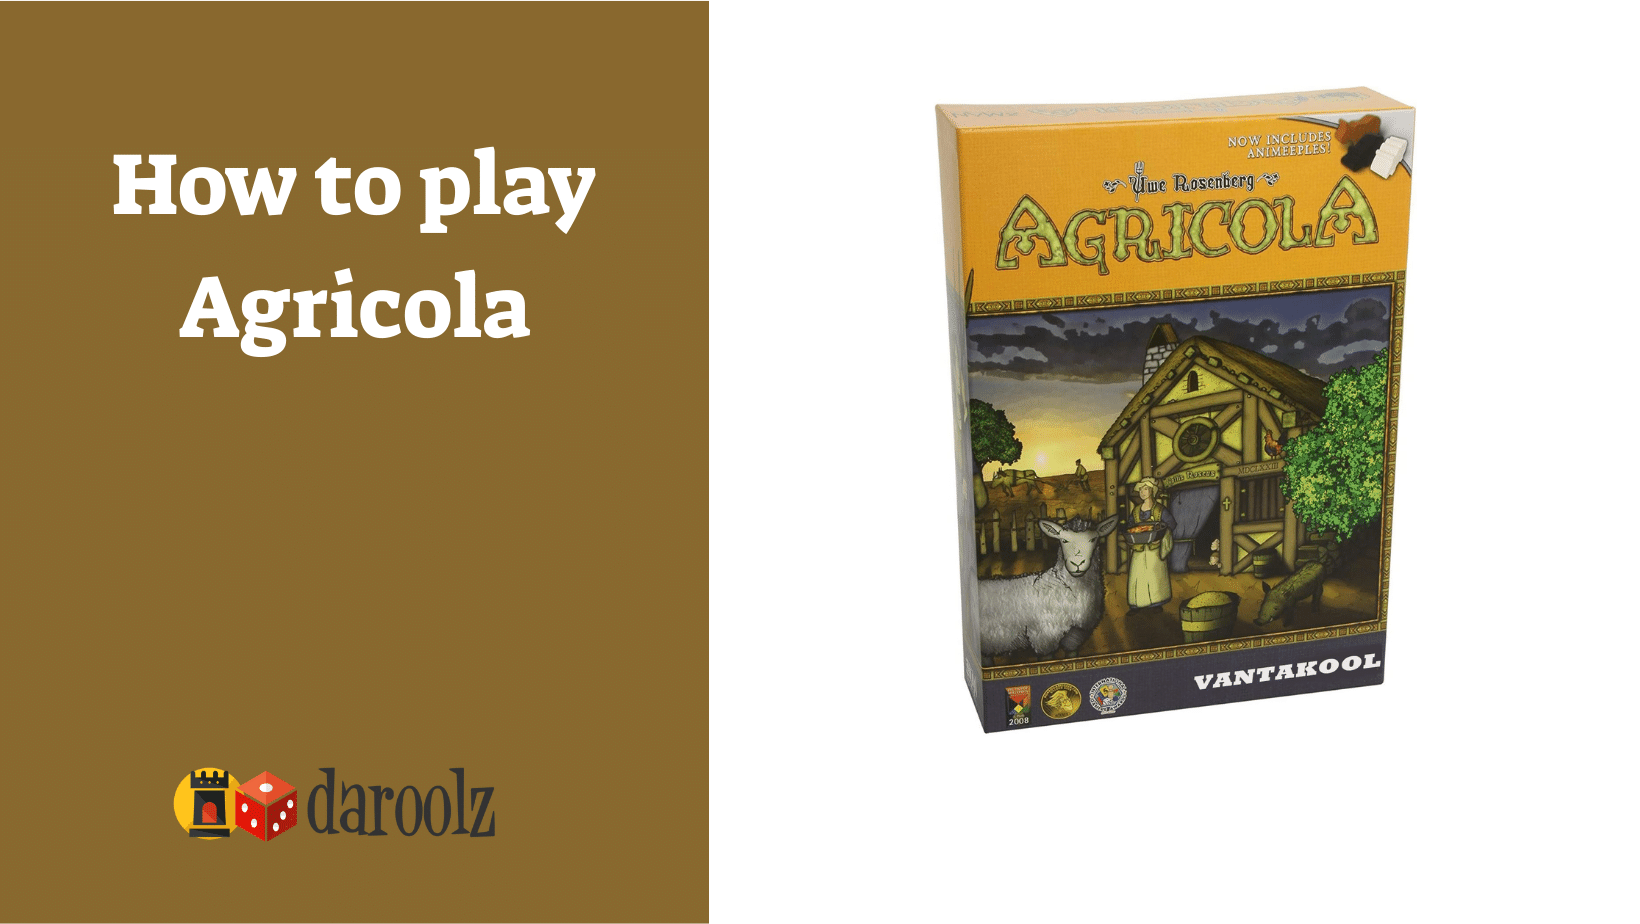 How to play Agricola